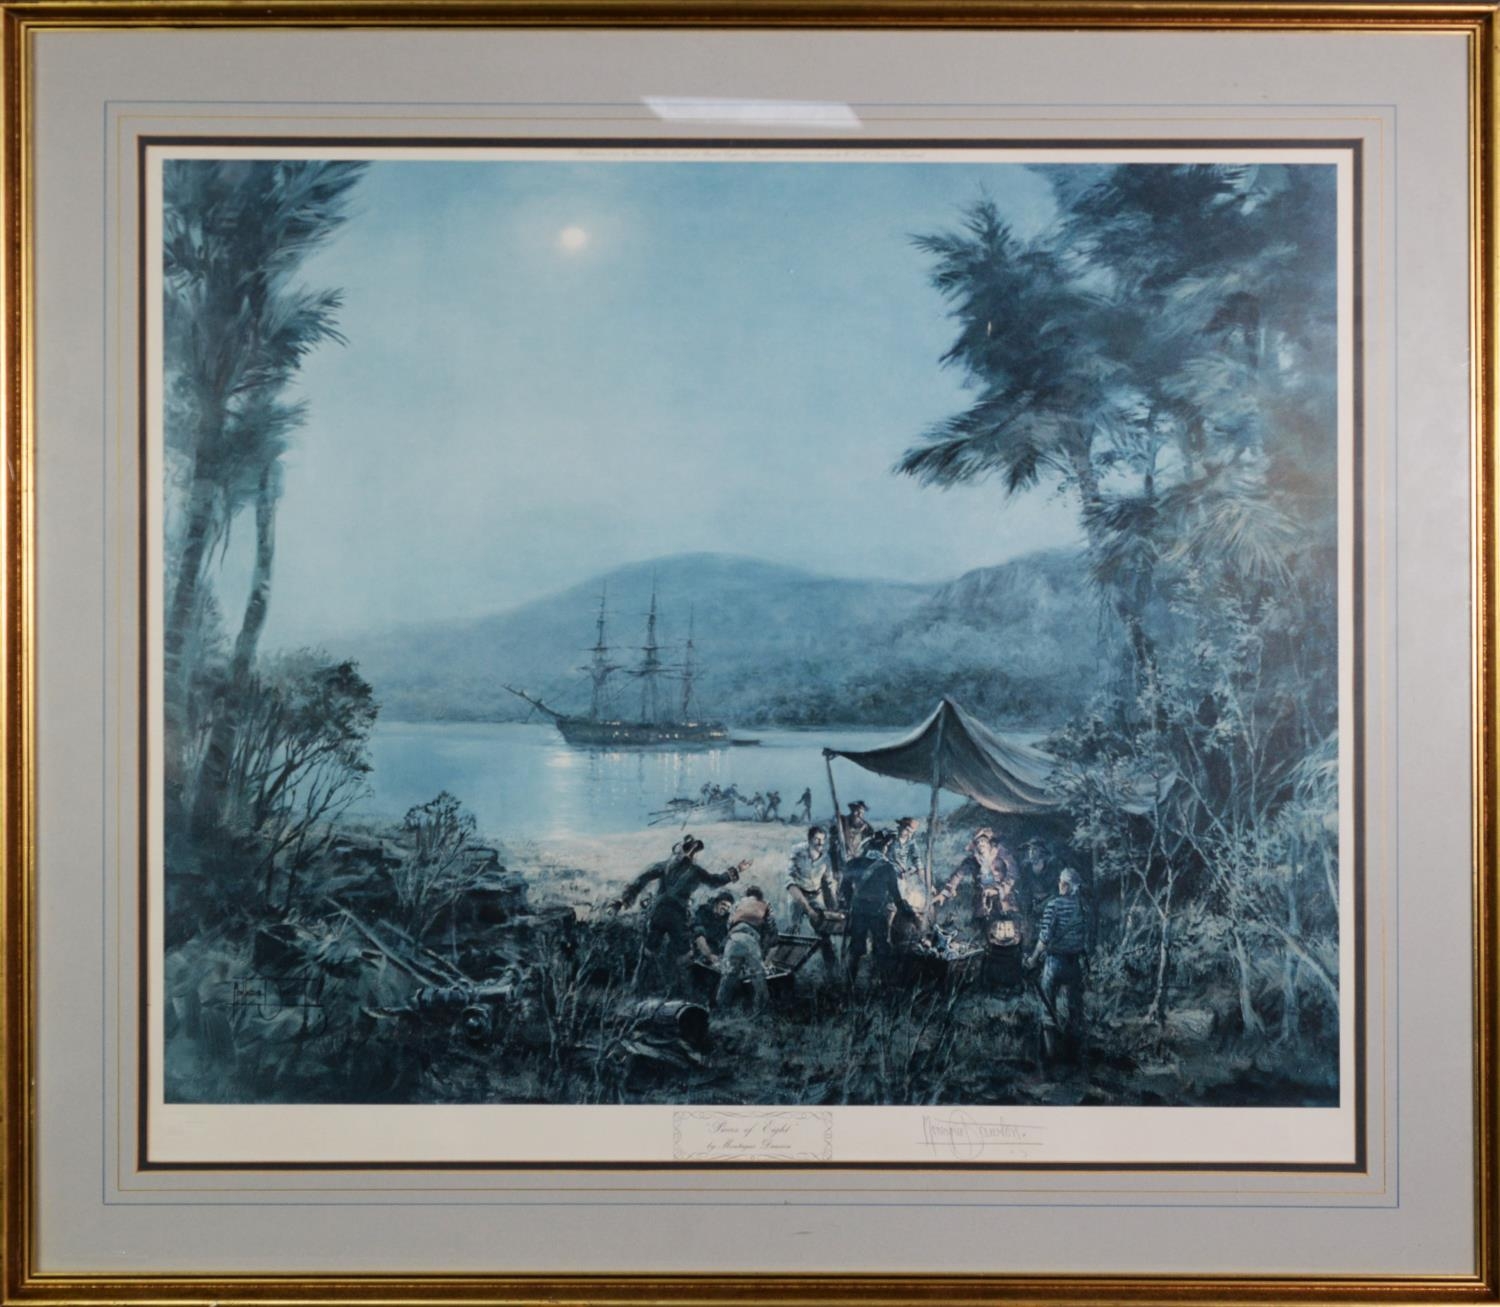 MONTAGUE DAWSON, three artists signed colour prints, seascapes with sailing vessels, signed in - Image 3 of 6